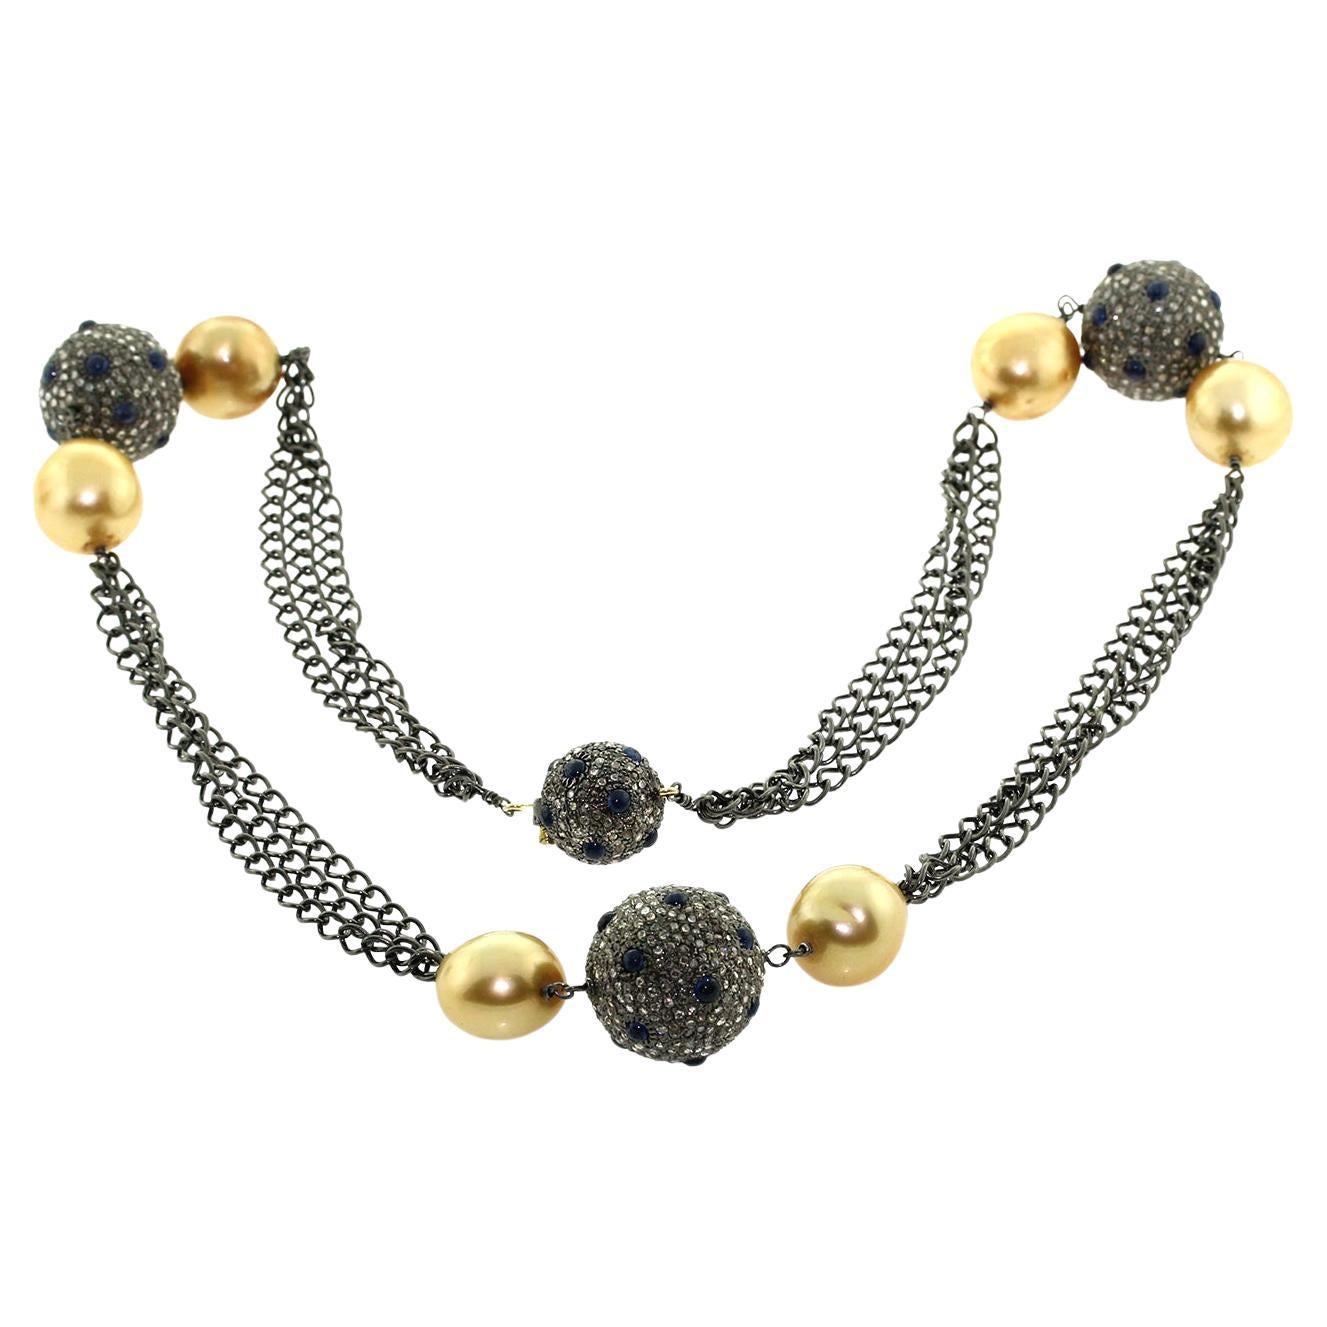 Ethnic looking Pave Diamond & South Sea Bead Chain Necklace